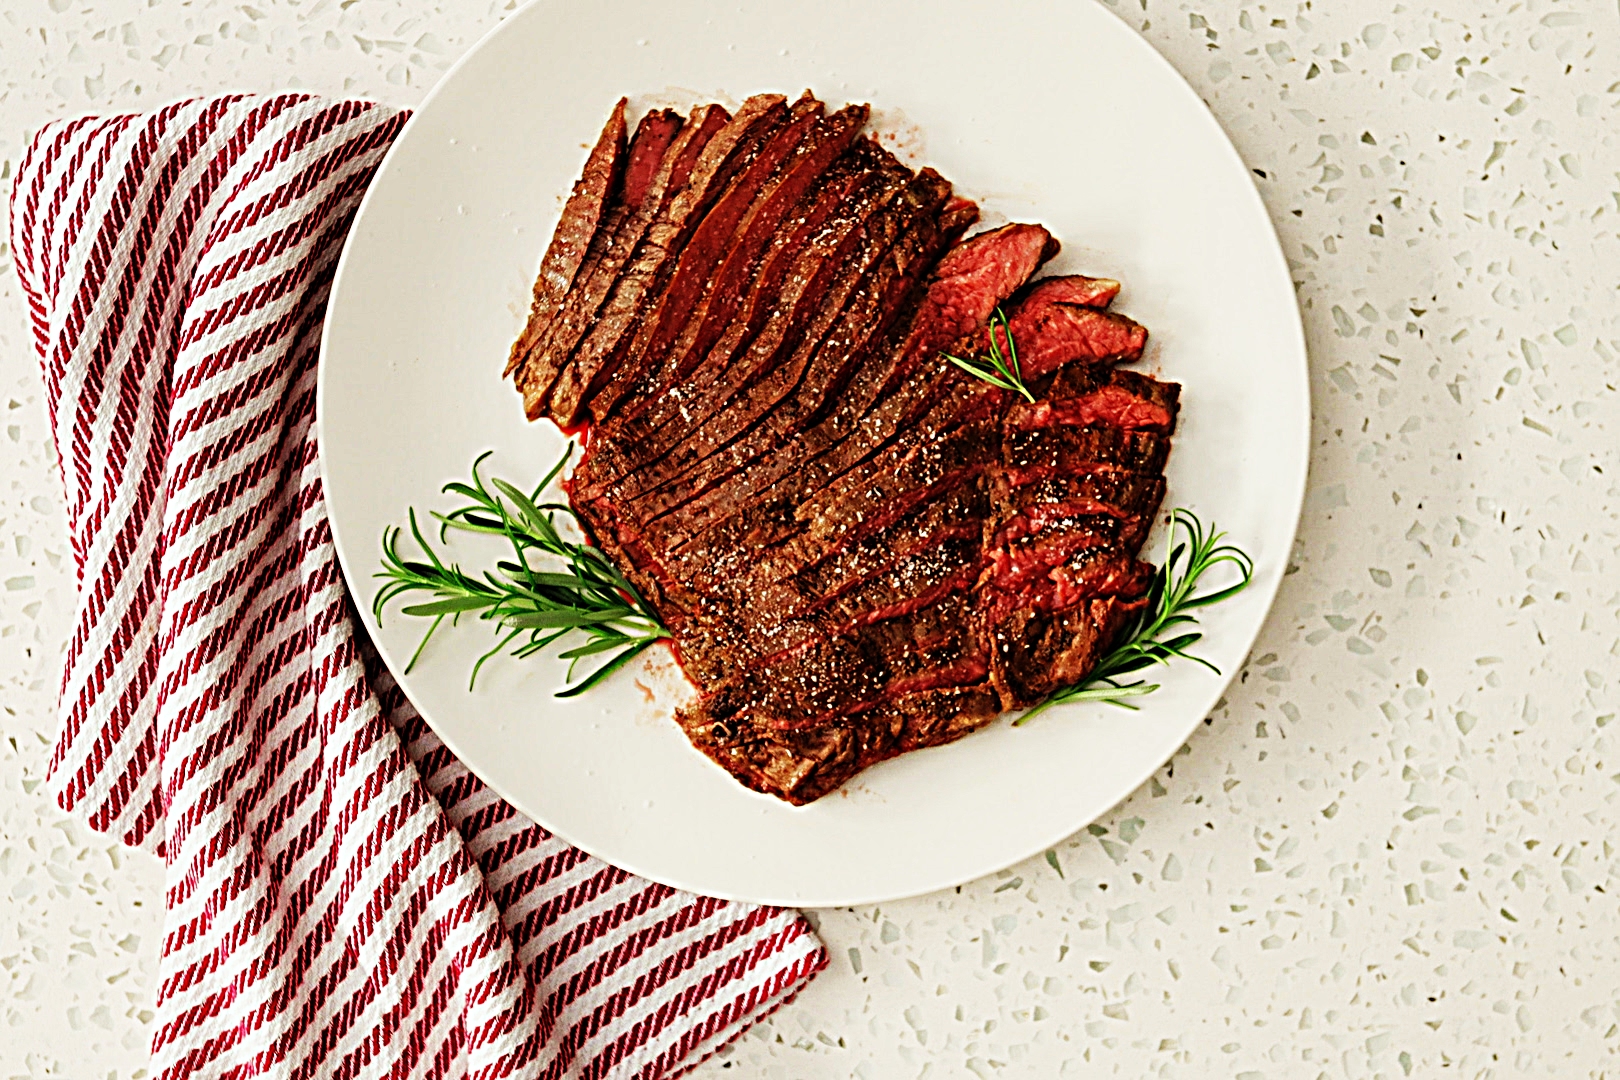 Stupid-Easy Recipe for Oven-Roasted Flank Steak (#1 Top-Rated)